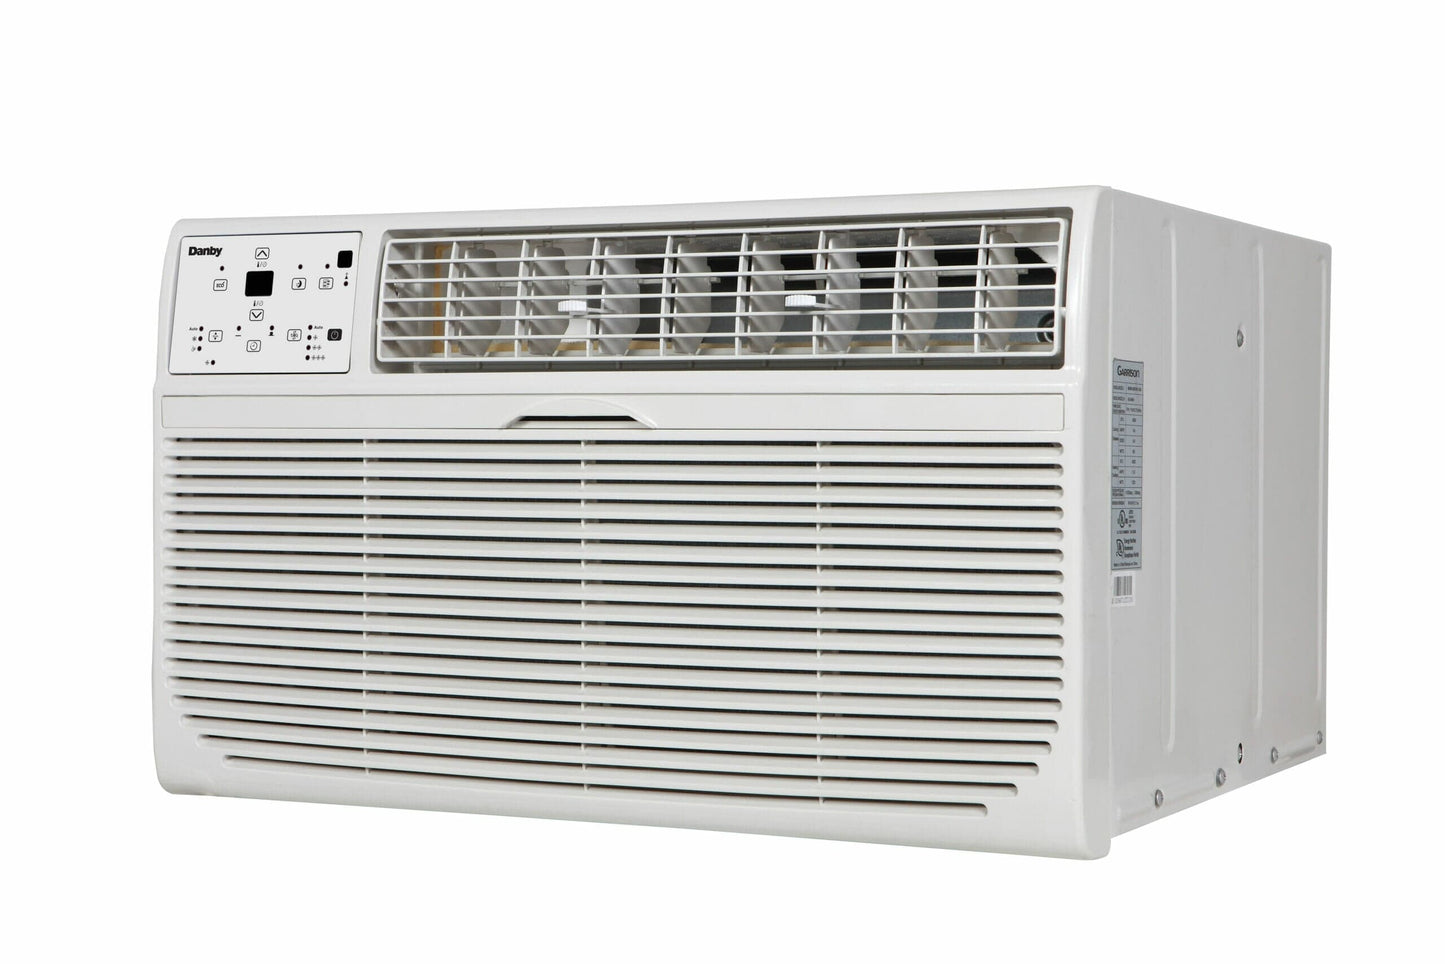 Danby 10000 BTU Through-the-Wall AC in White - DTAC100B1WDB (scratch and dent)